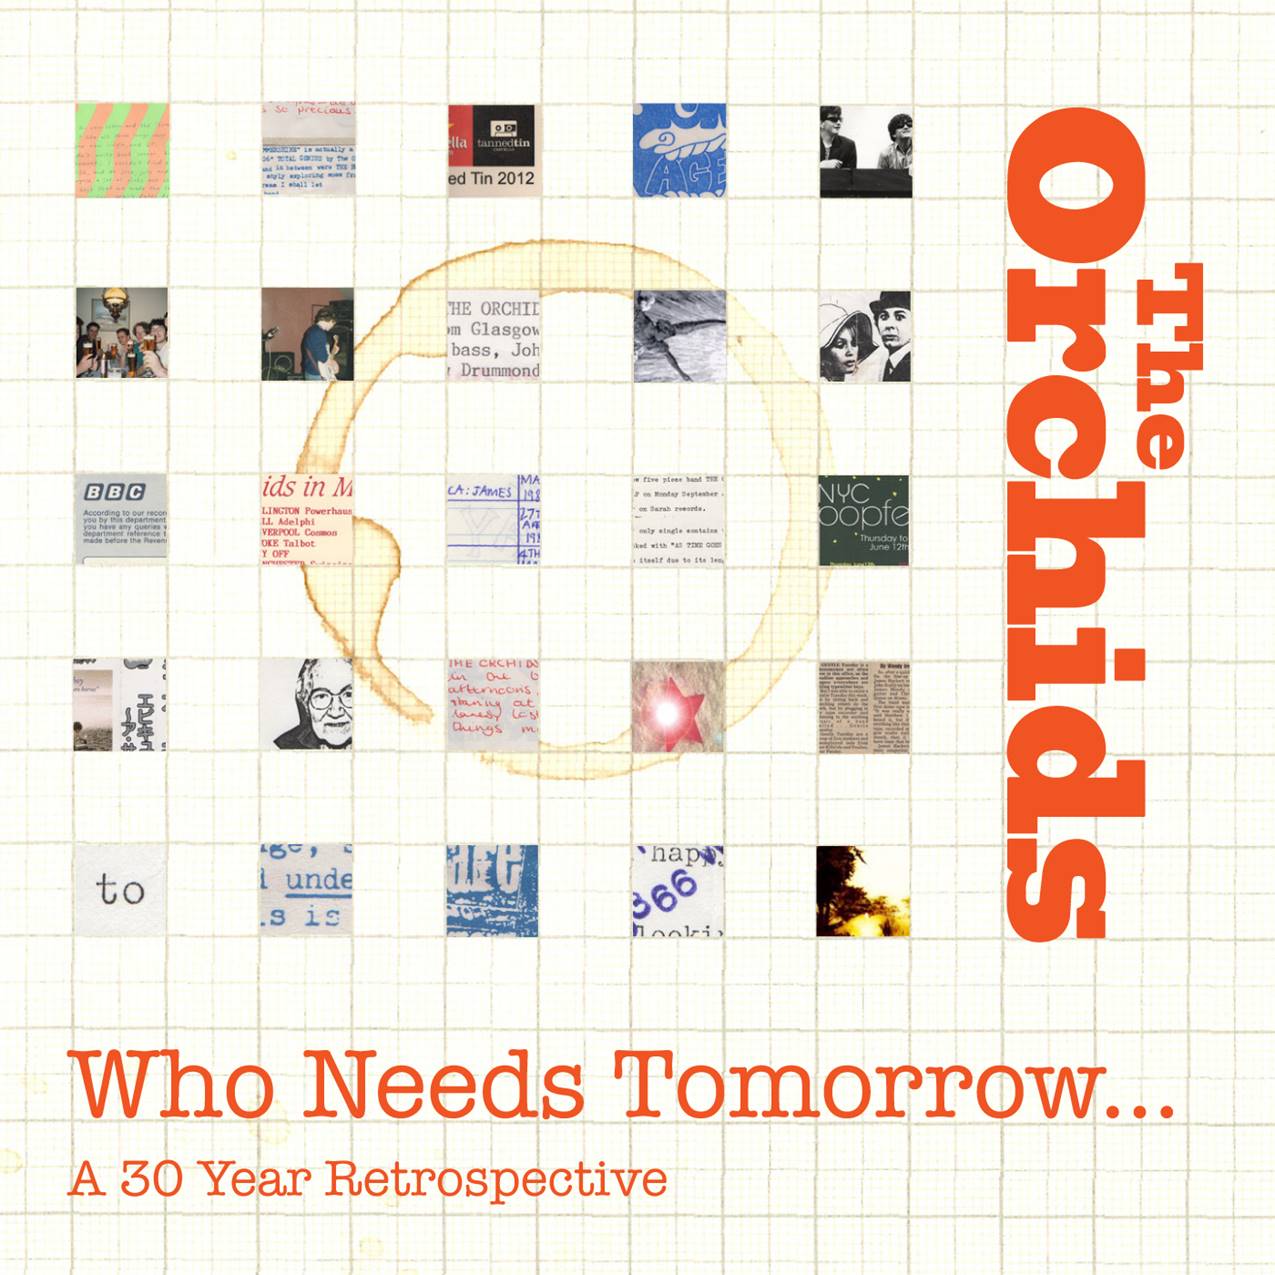 The Orchids Who Needs Tomorrow A 30 Year Retrospective All About The Rock